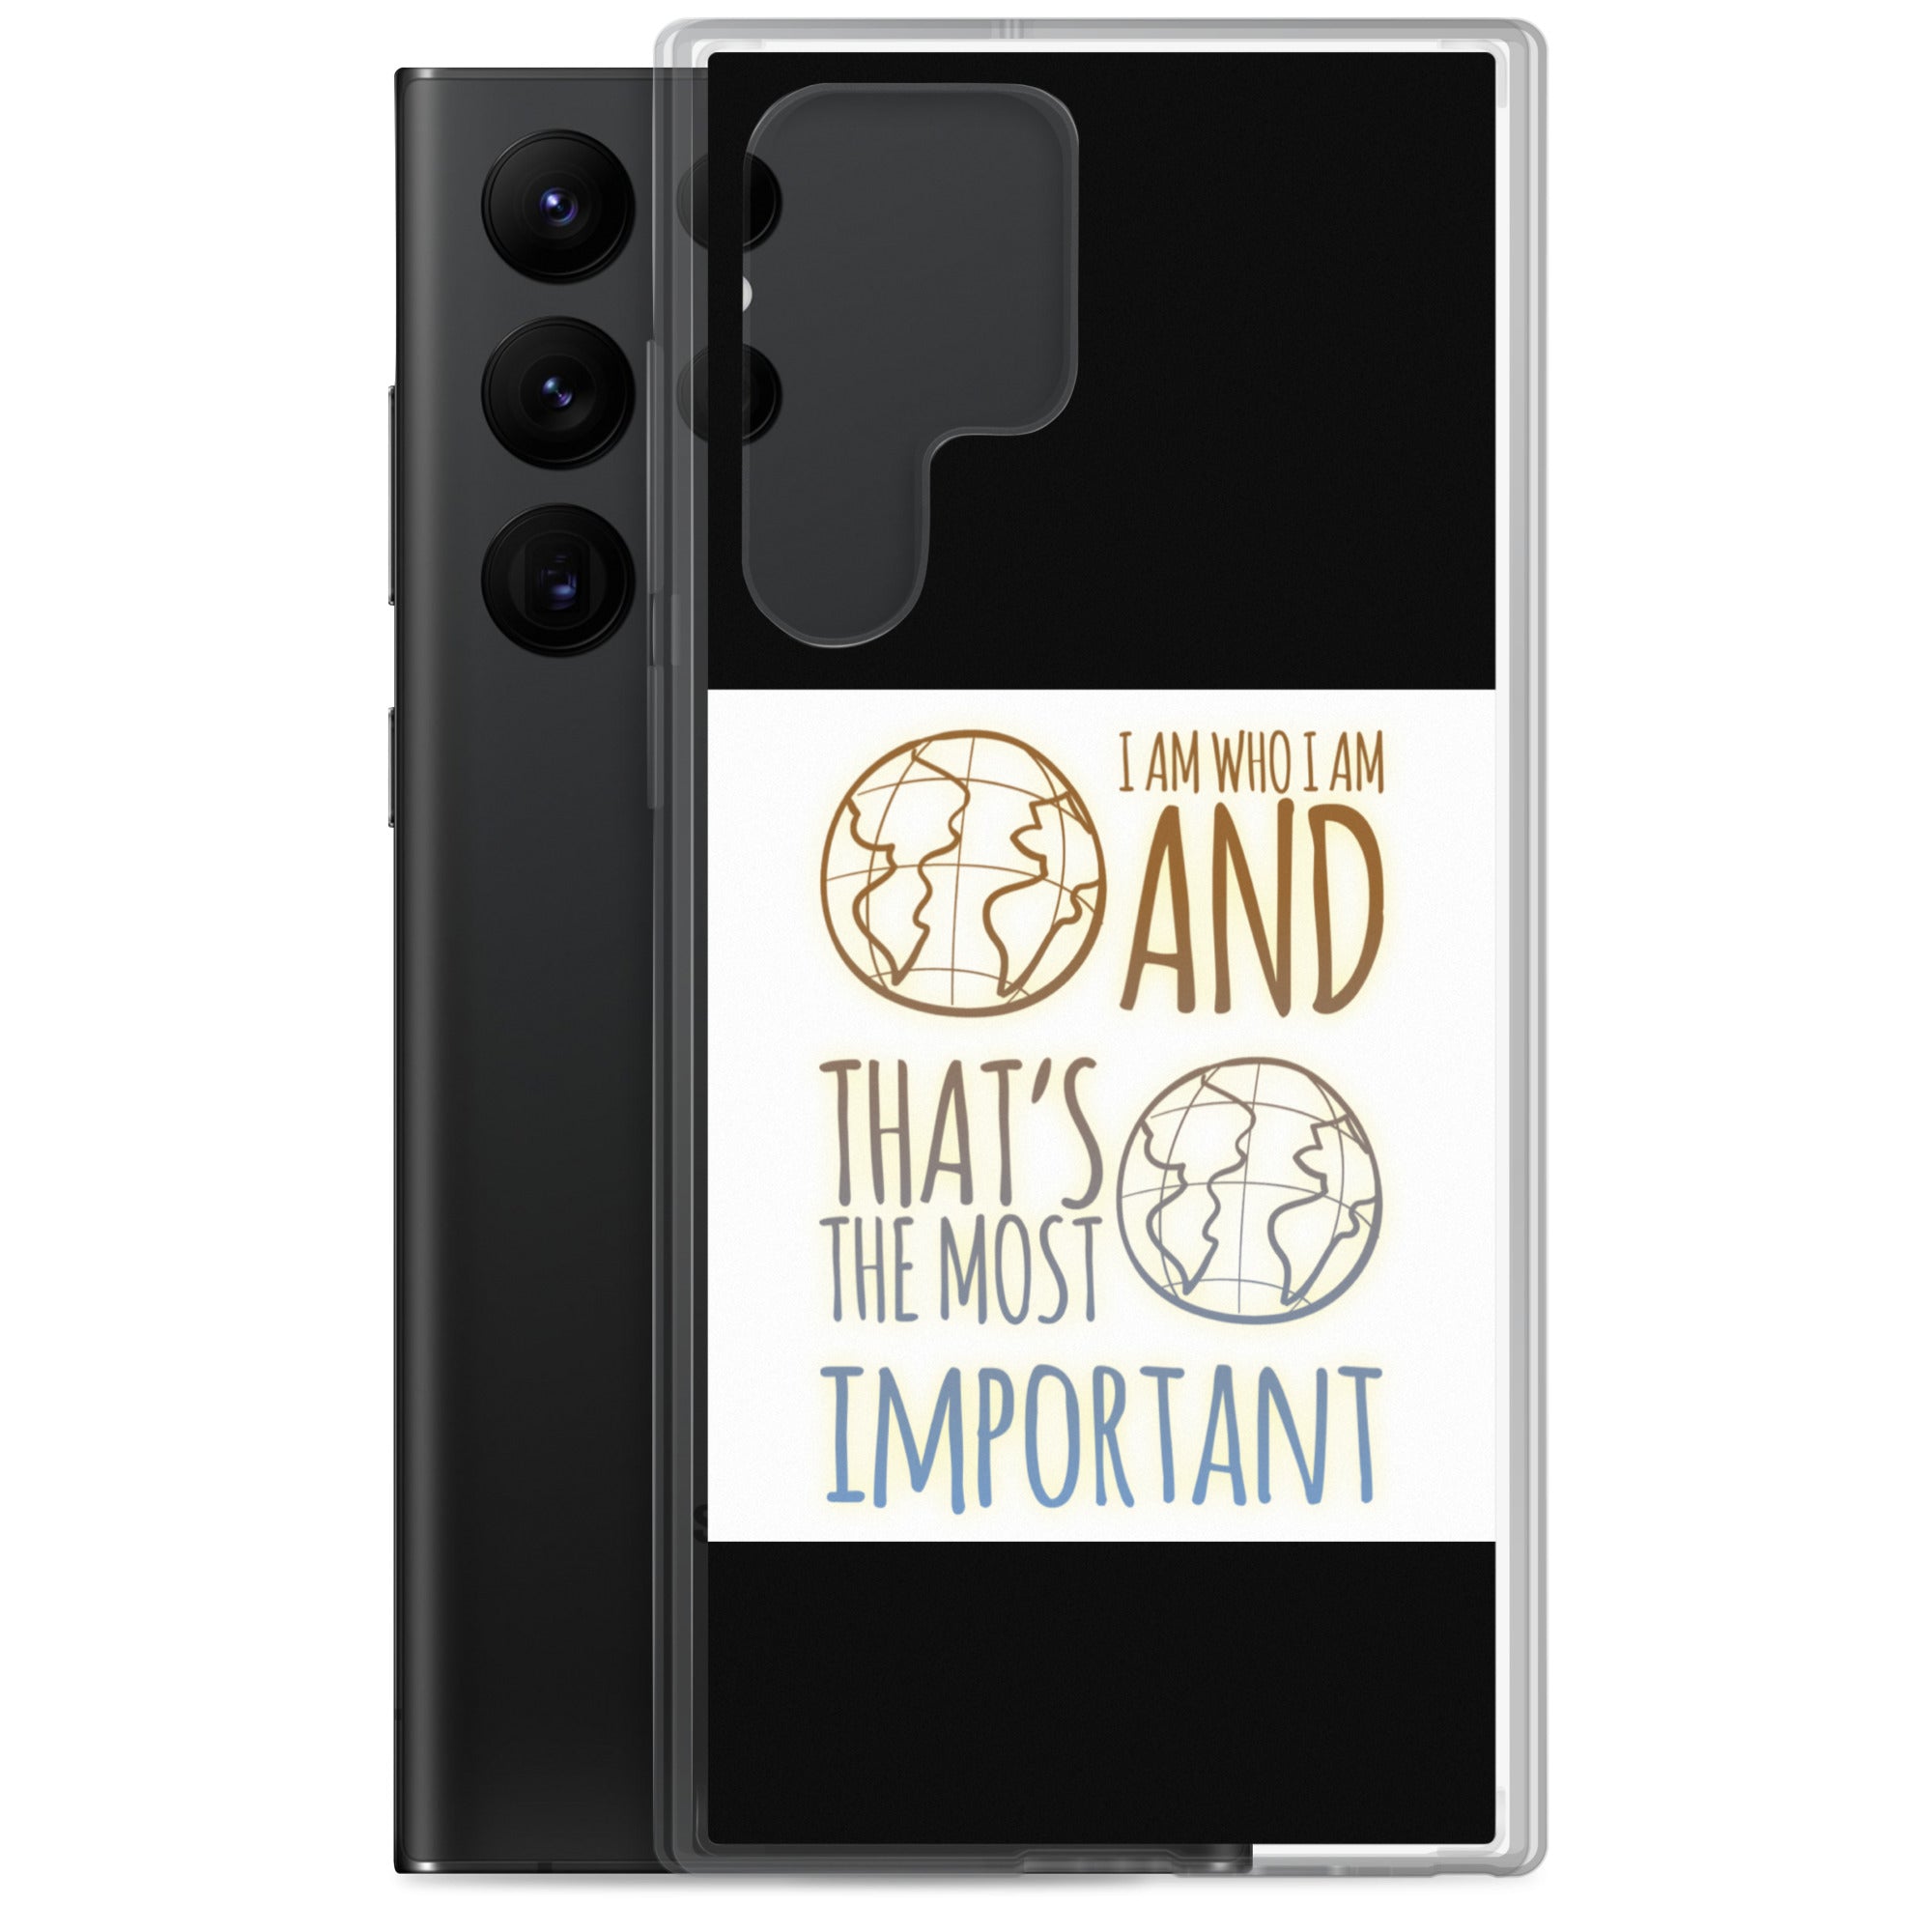 GloWell Designs - Samsung Case - Affirmation Quote - I Am Who I Am - GloWell Designs